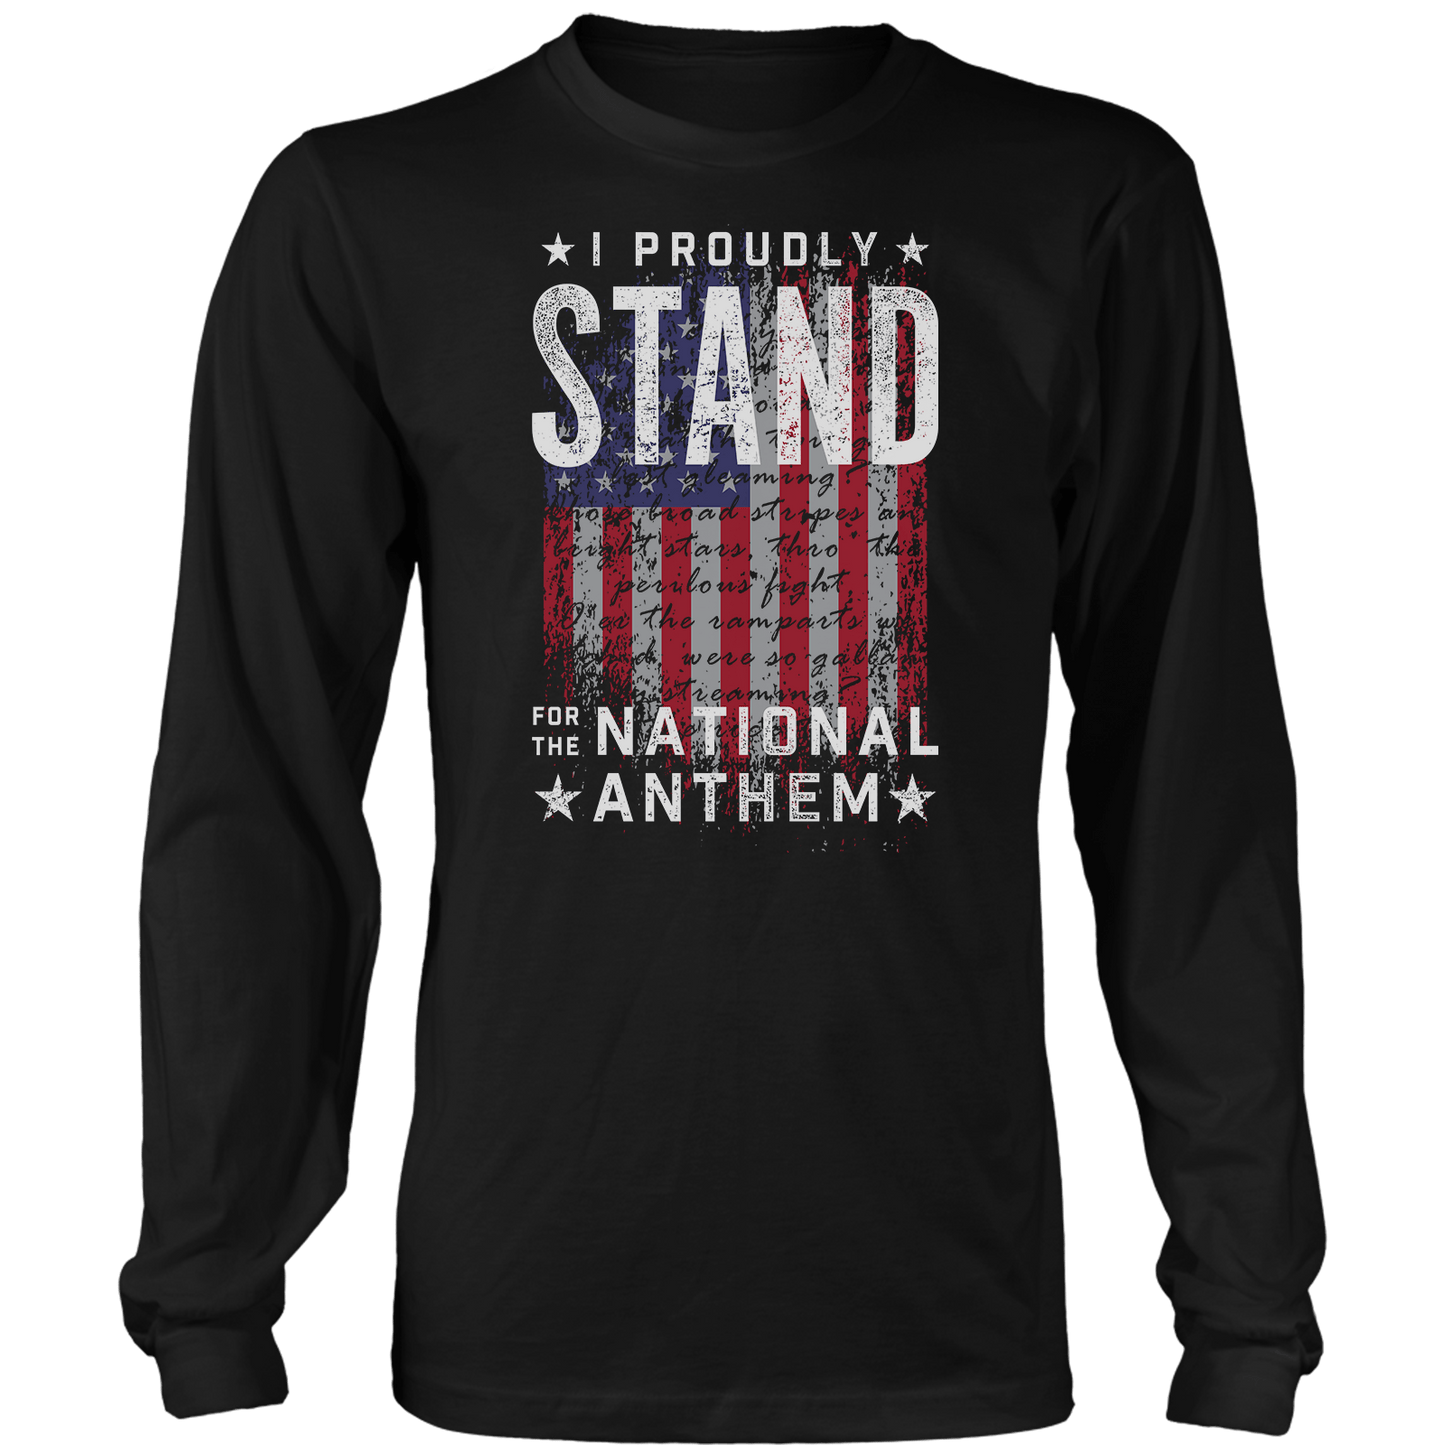 T-shirt Mens Long Sleeve / Black / S I Stand for the Anthem